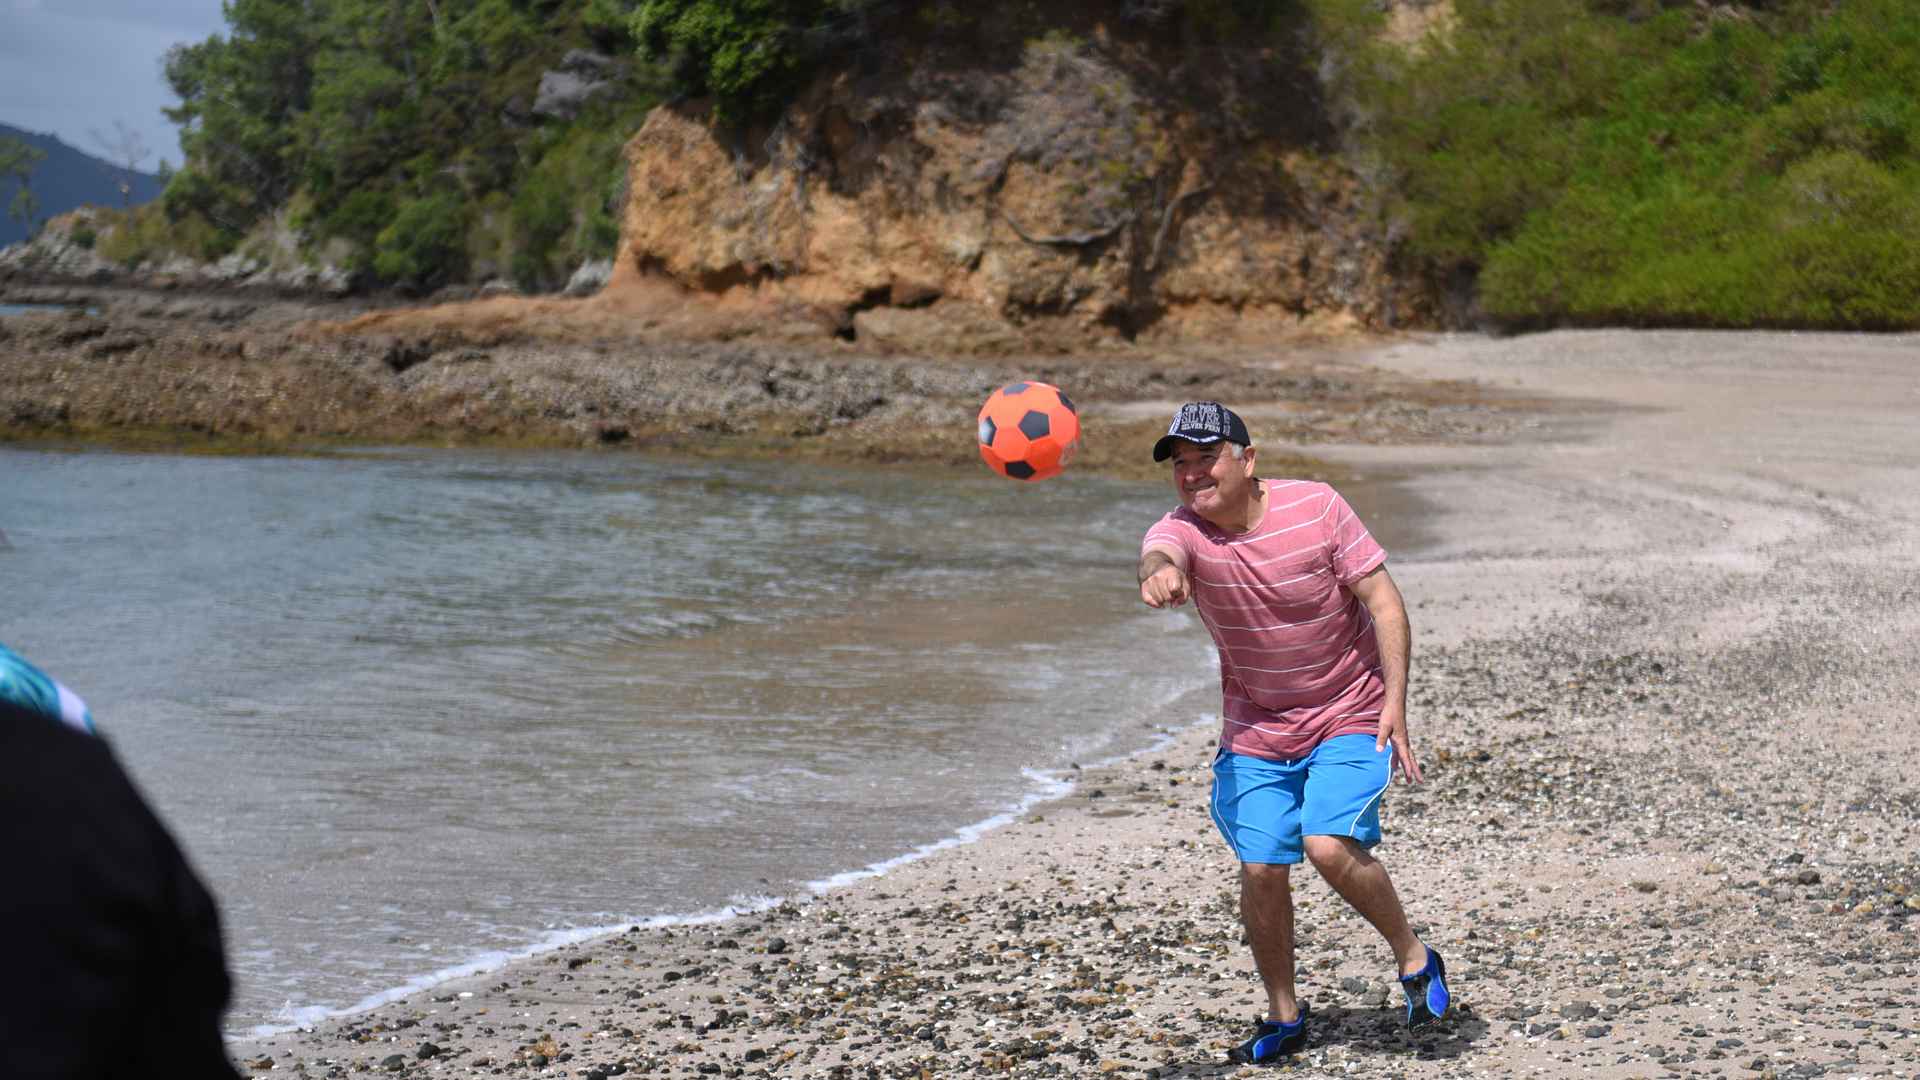 beach foot ball at the bay of islands